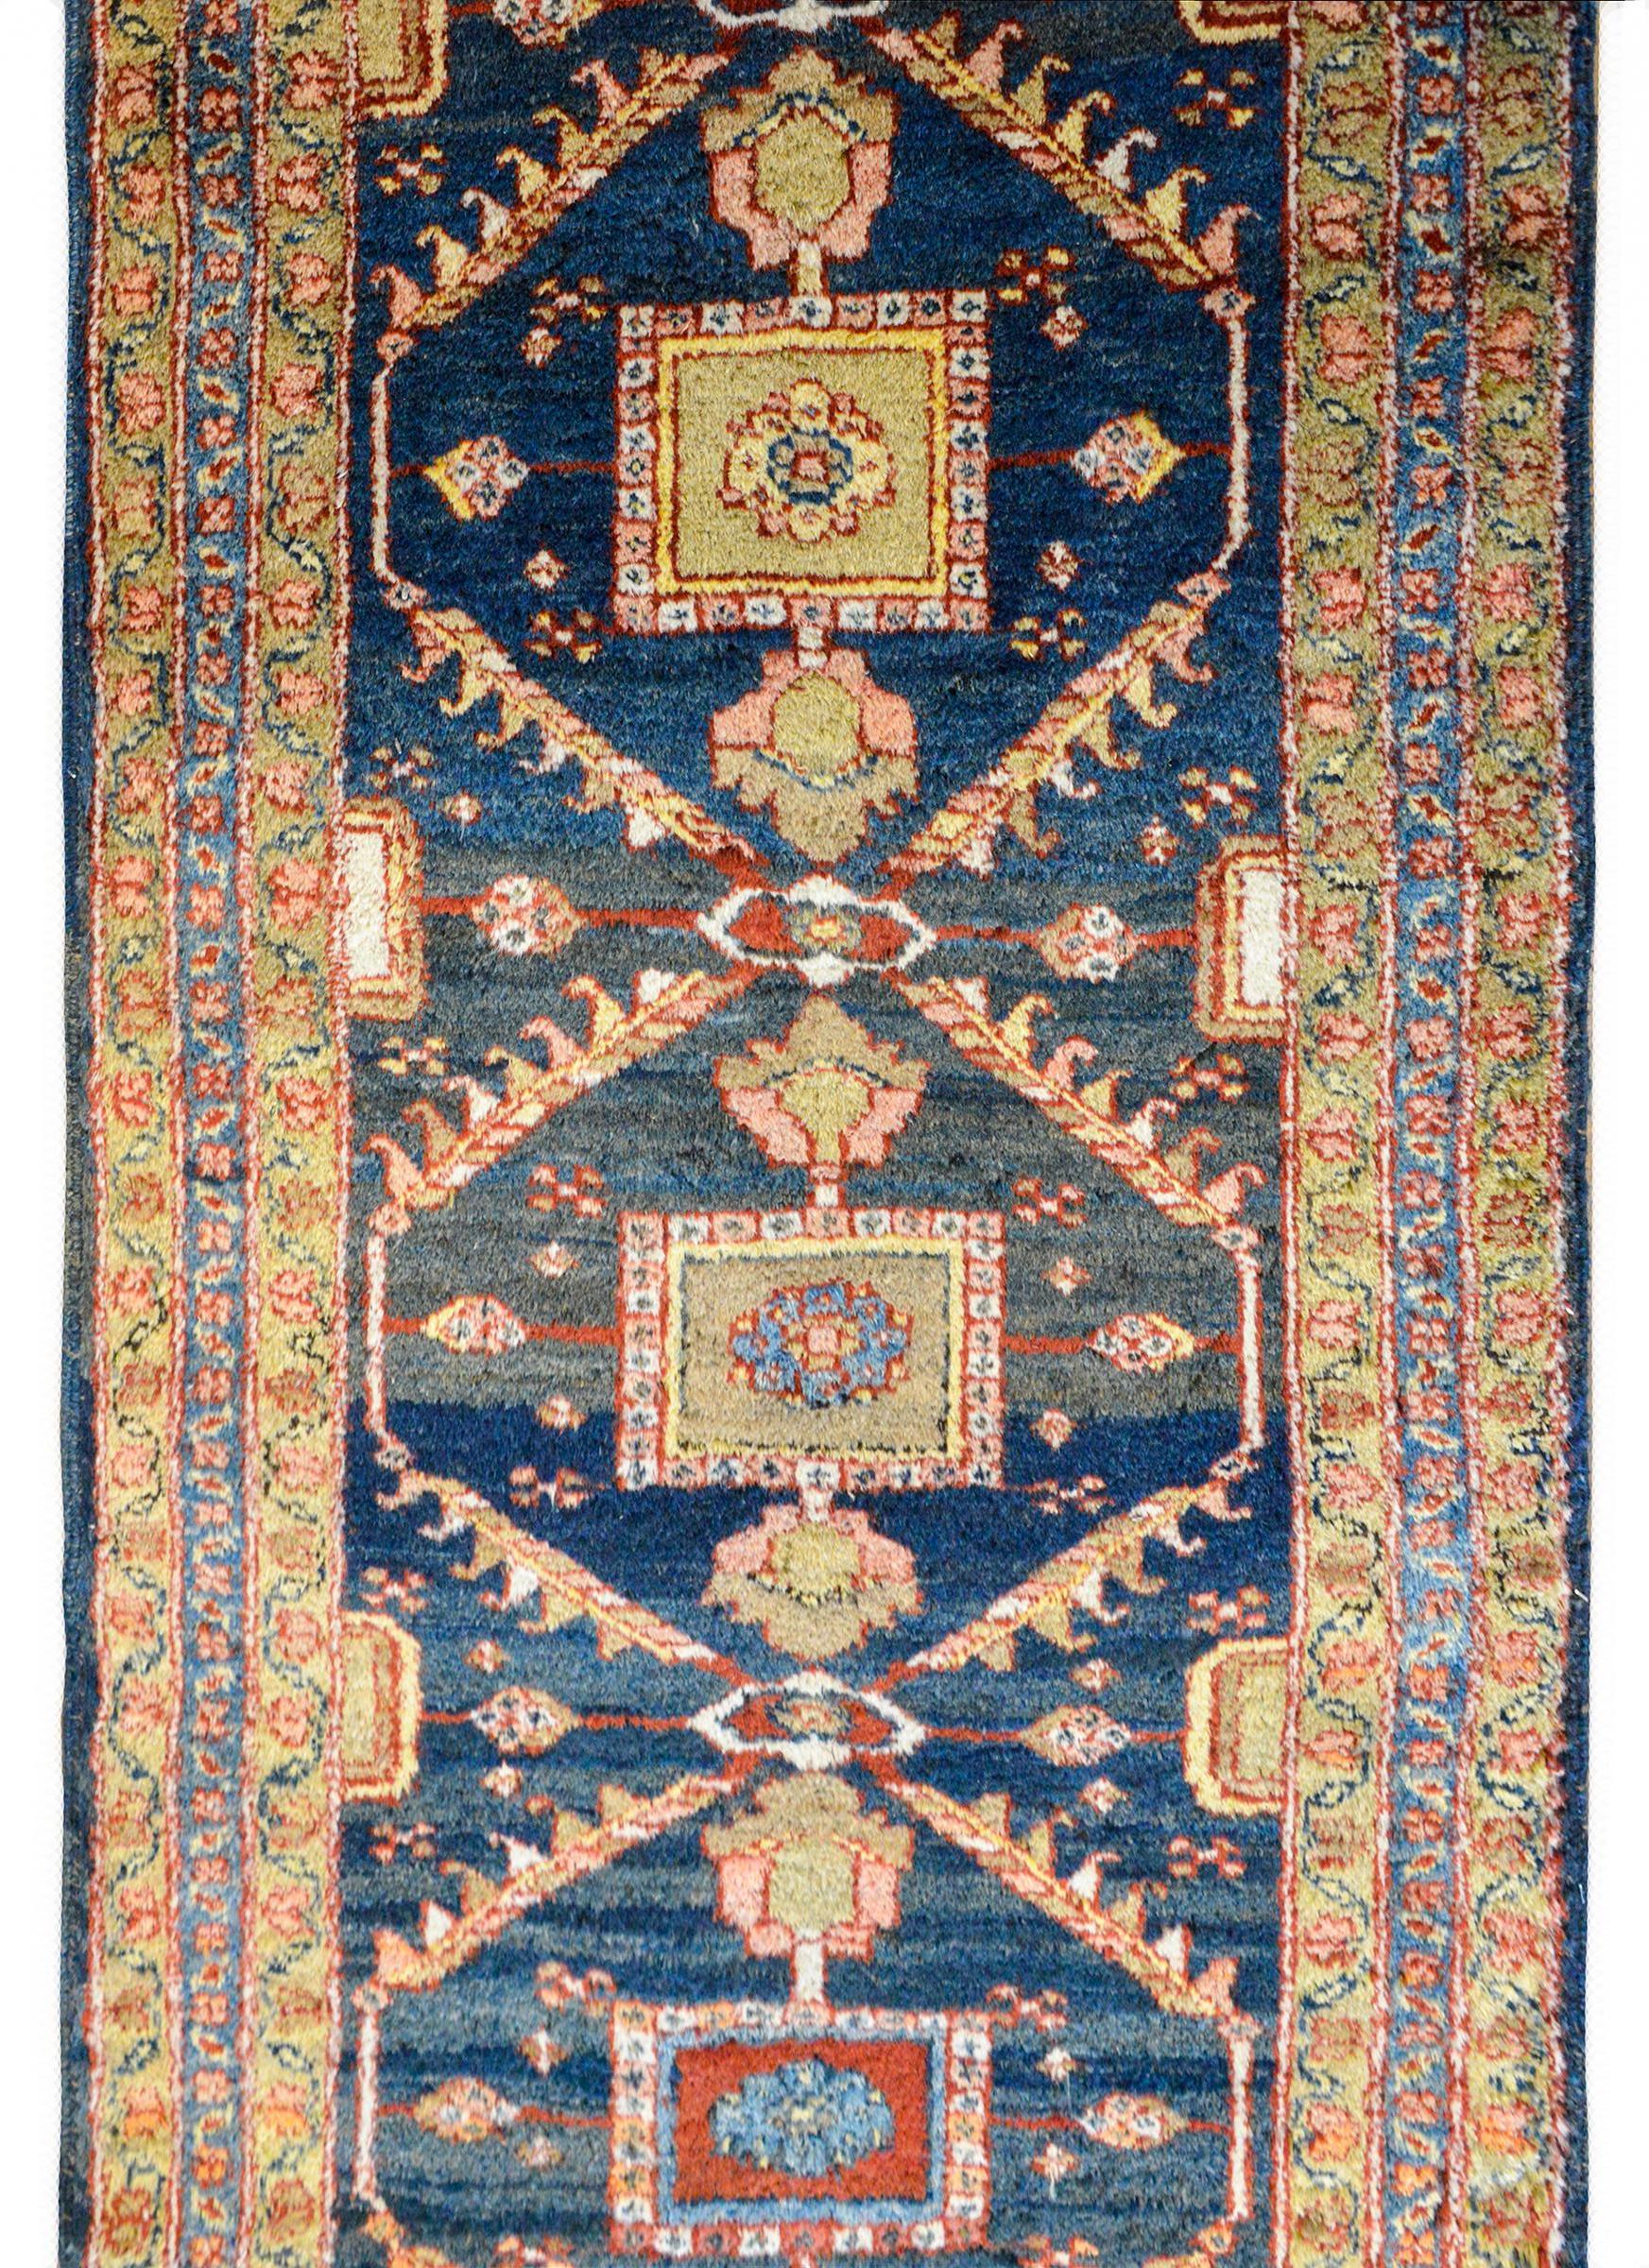 A beautiful 20th century Persian Azari runner with seven large medallions with stylized flowers and leaves woven in crimson, pink, white, brown, and pale green, all against an Abrash indigo background. The border is complex, composed of a petite